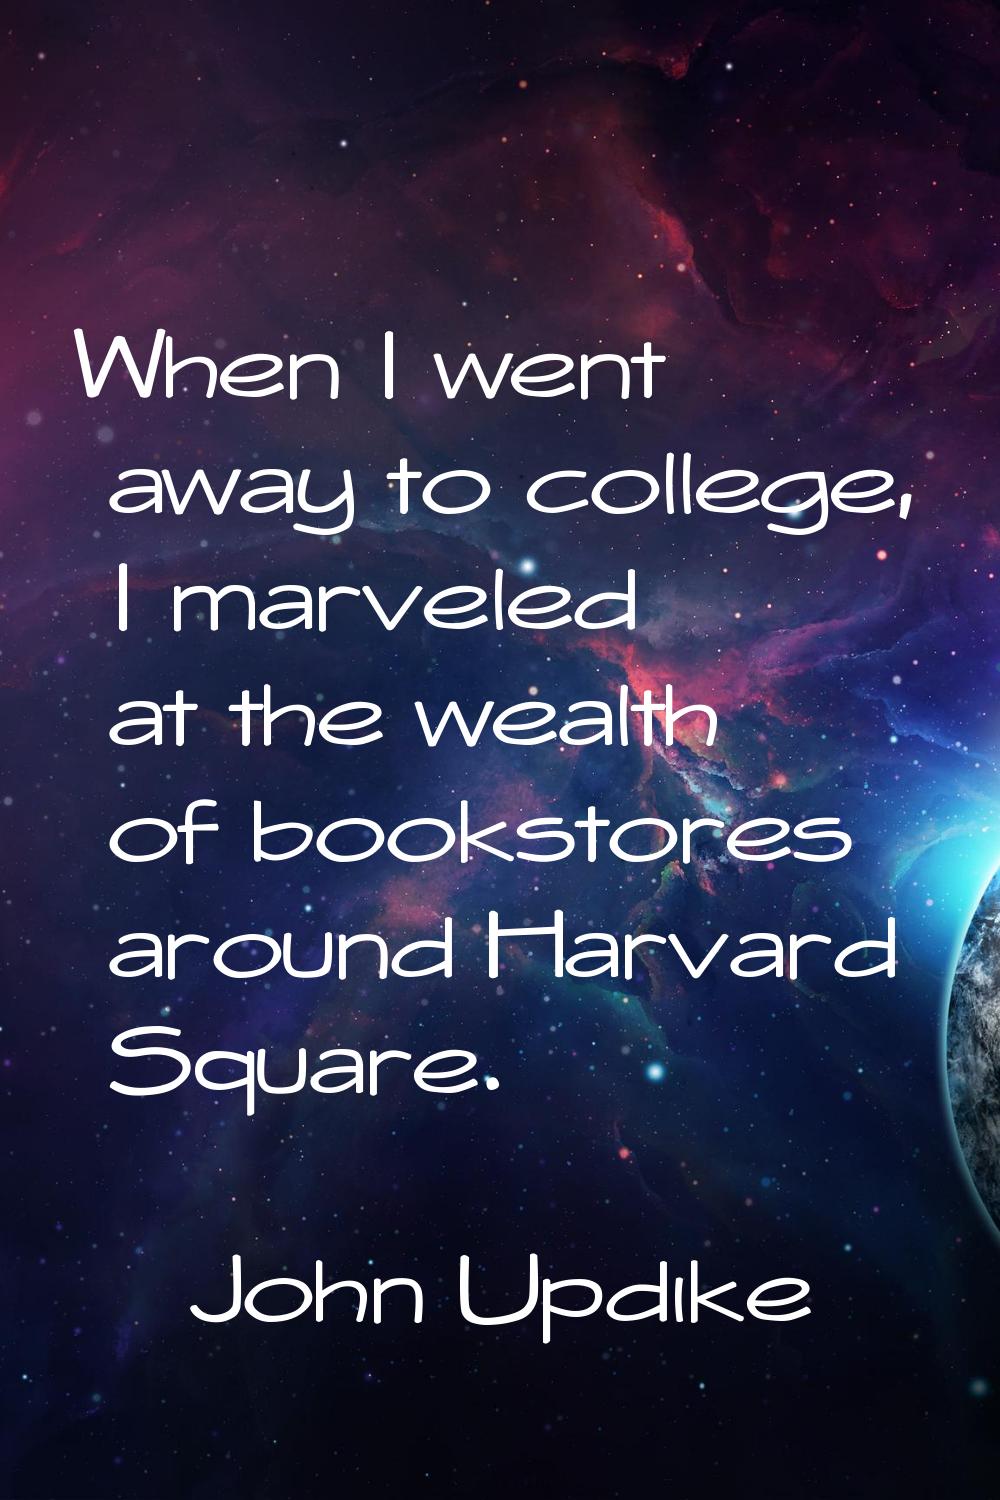 When I went away to college, I marveled at the wealth of bookstores around Harvard Square.